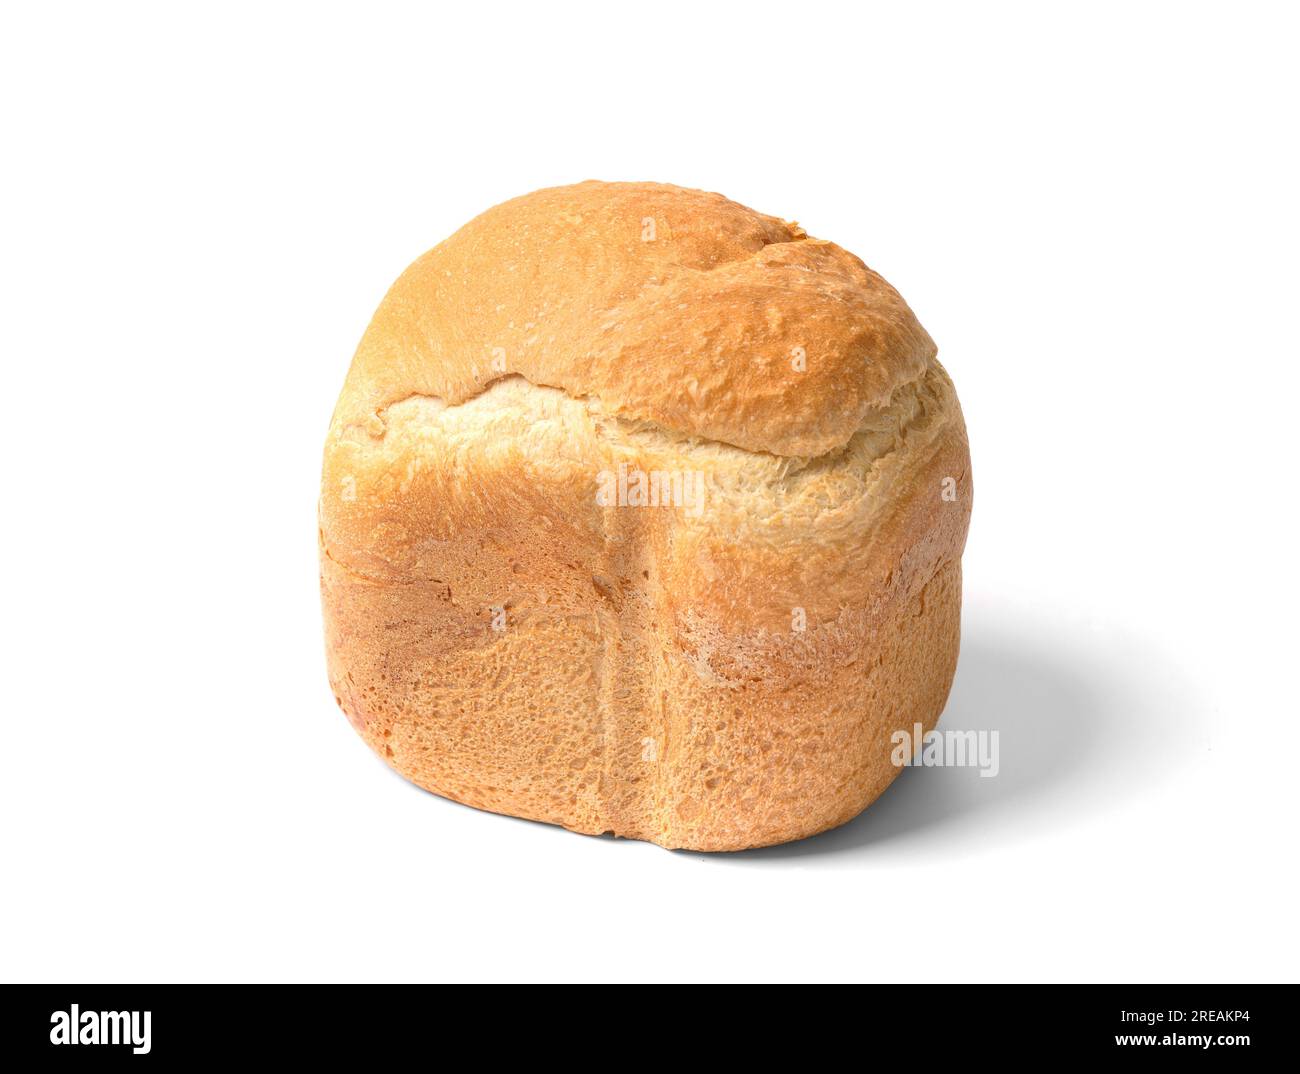 https://c8.alamy.com/comp/2REAKP4/fresh-homemade-bread-with-a-crispy-crust-made-in-an-automatic-bread-maker-isolated-on-a-white-background-bread-made-from-wheat-flour-2REAKP4.jpg